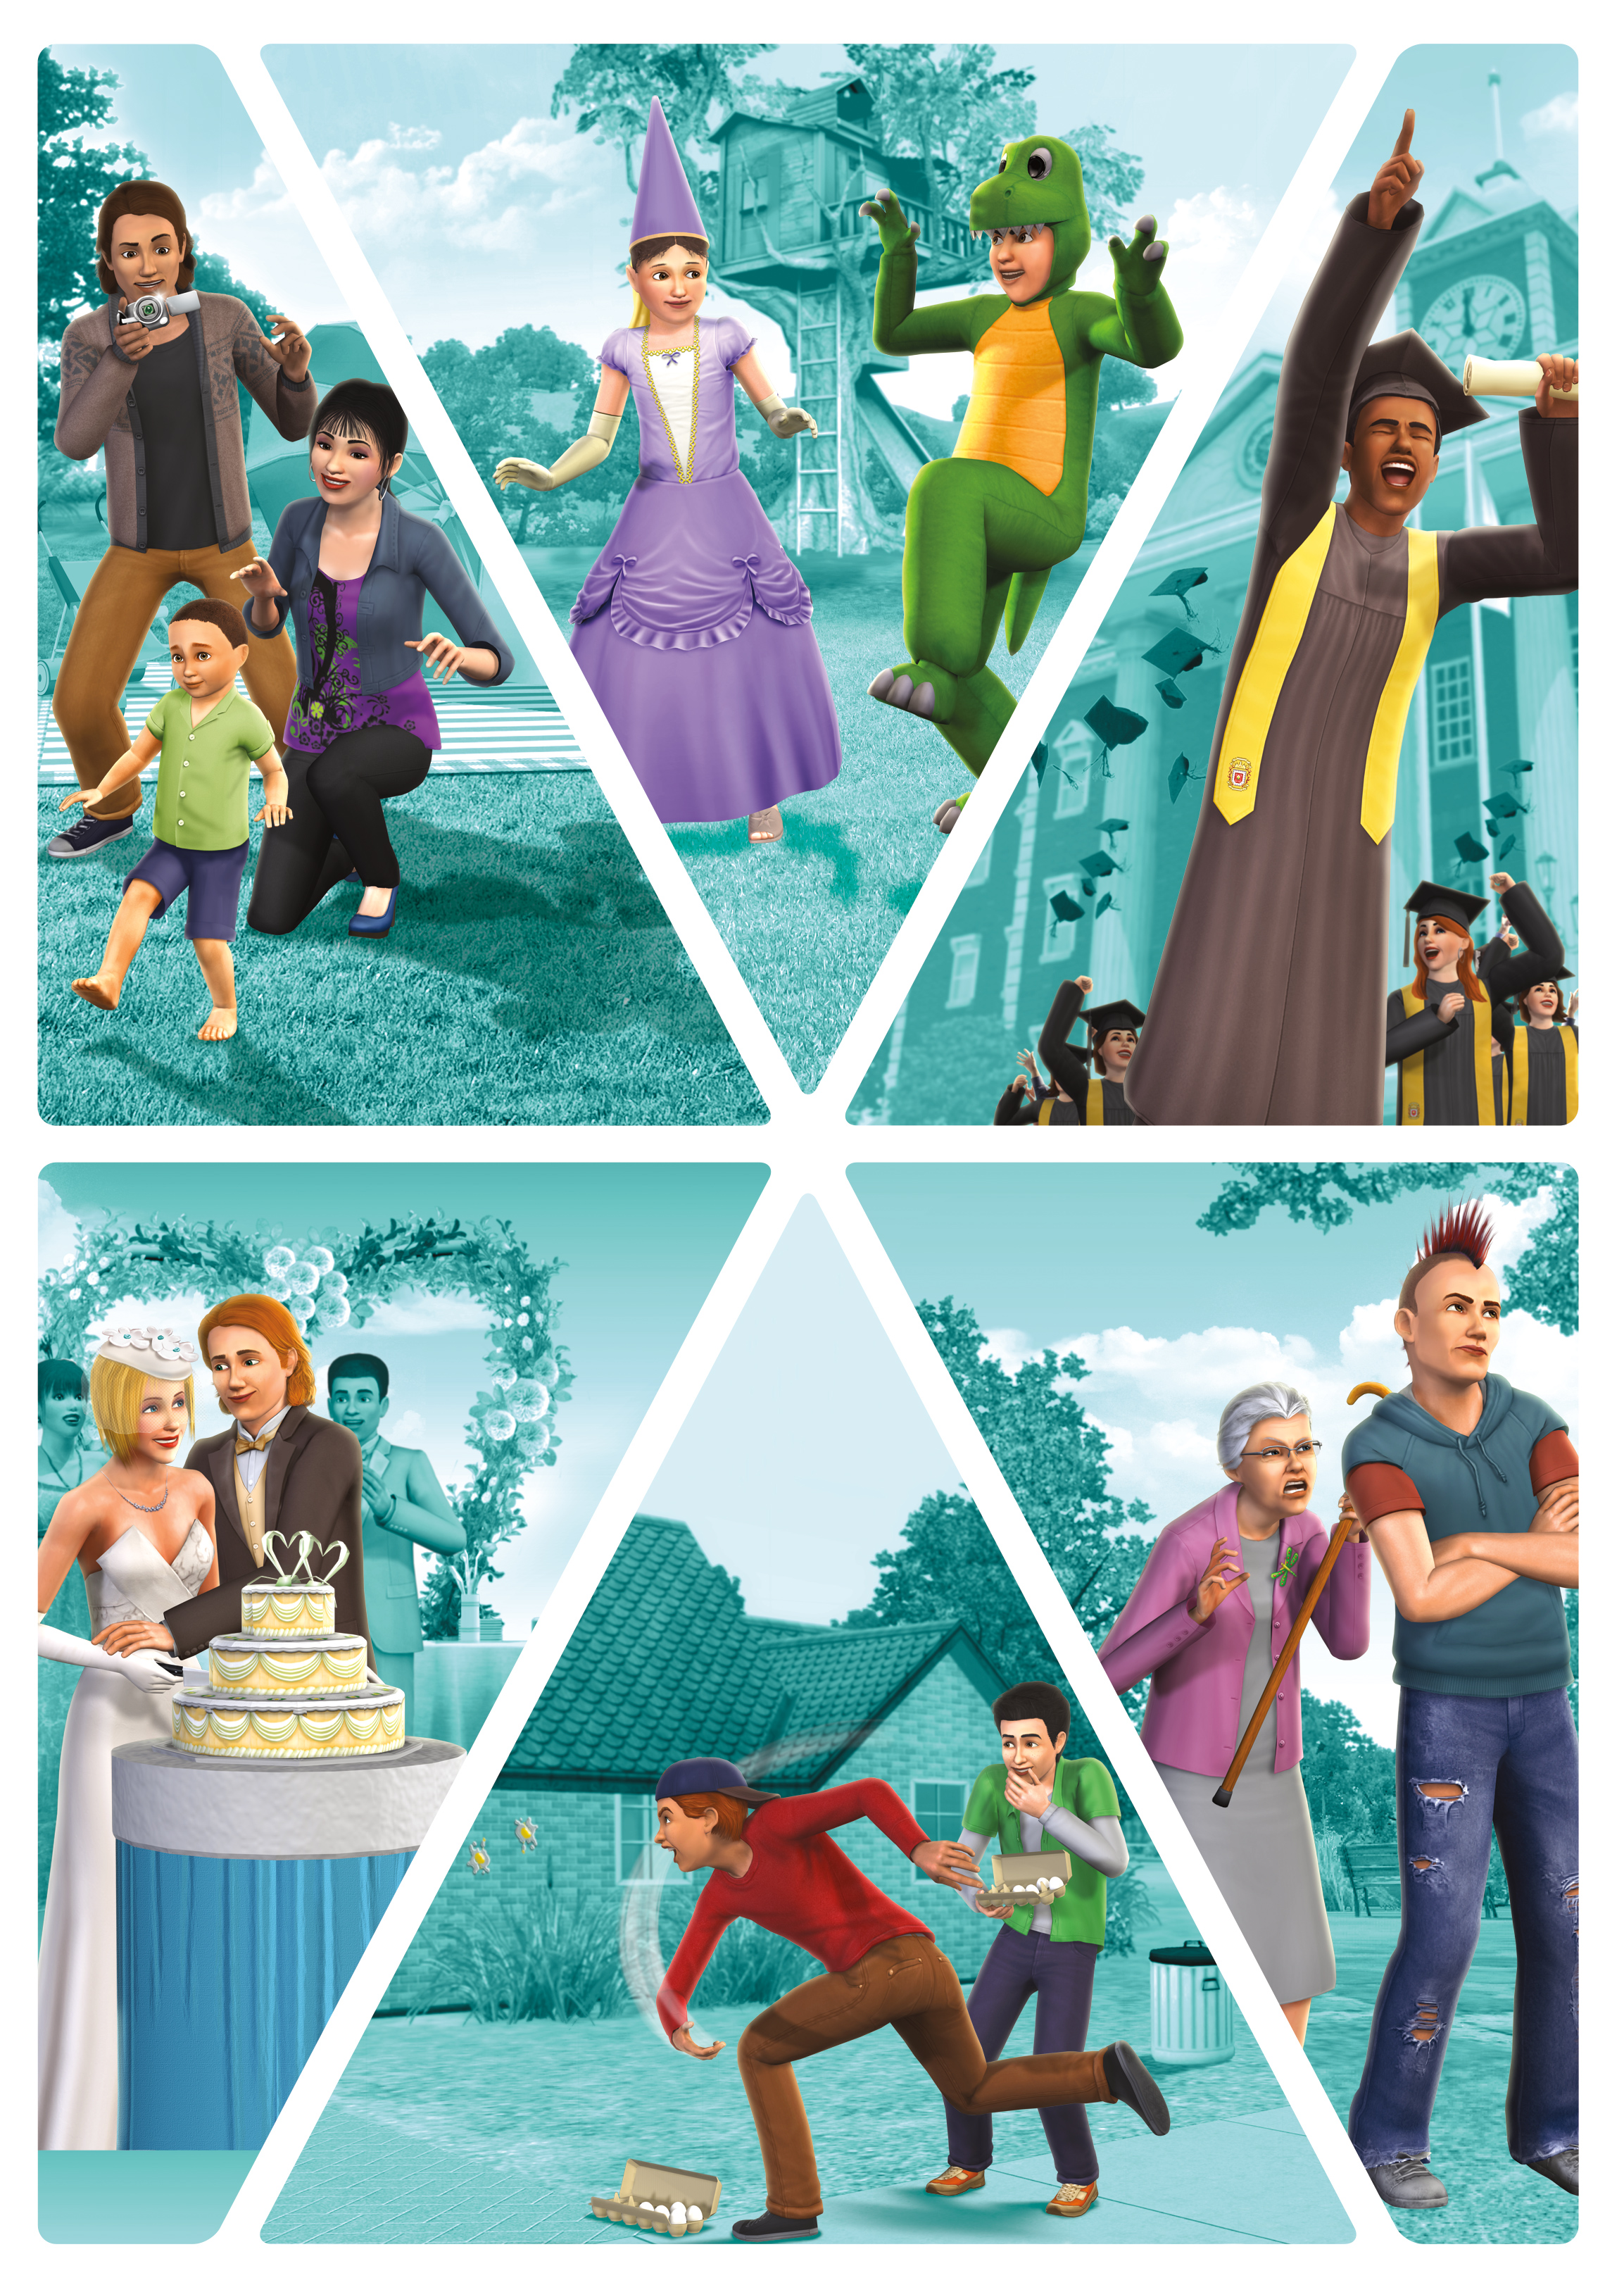 the sims 3 generation expansion pack